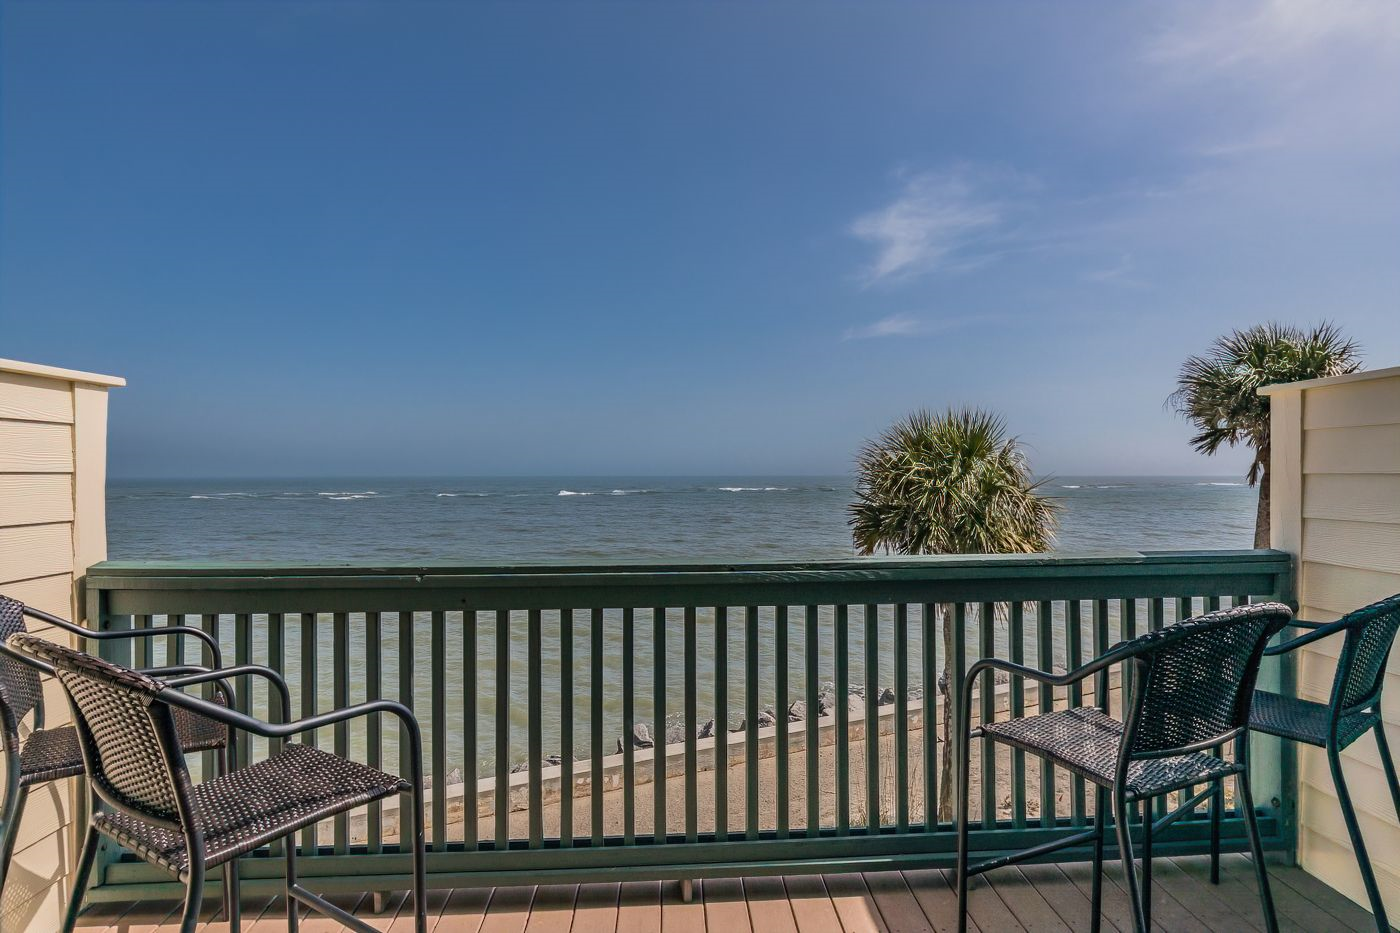 Patio Ocean view with 4 chairs